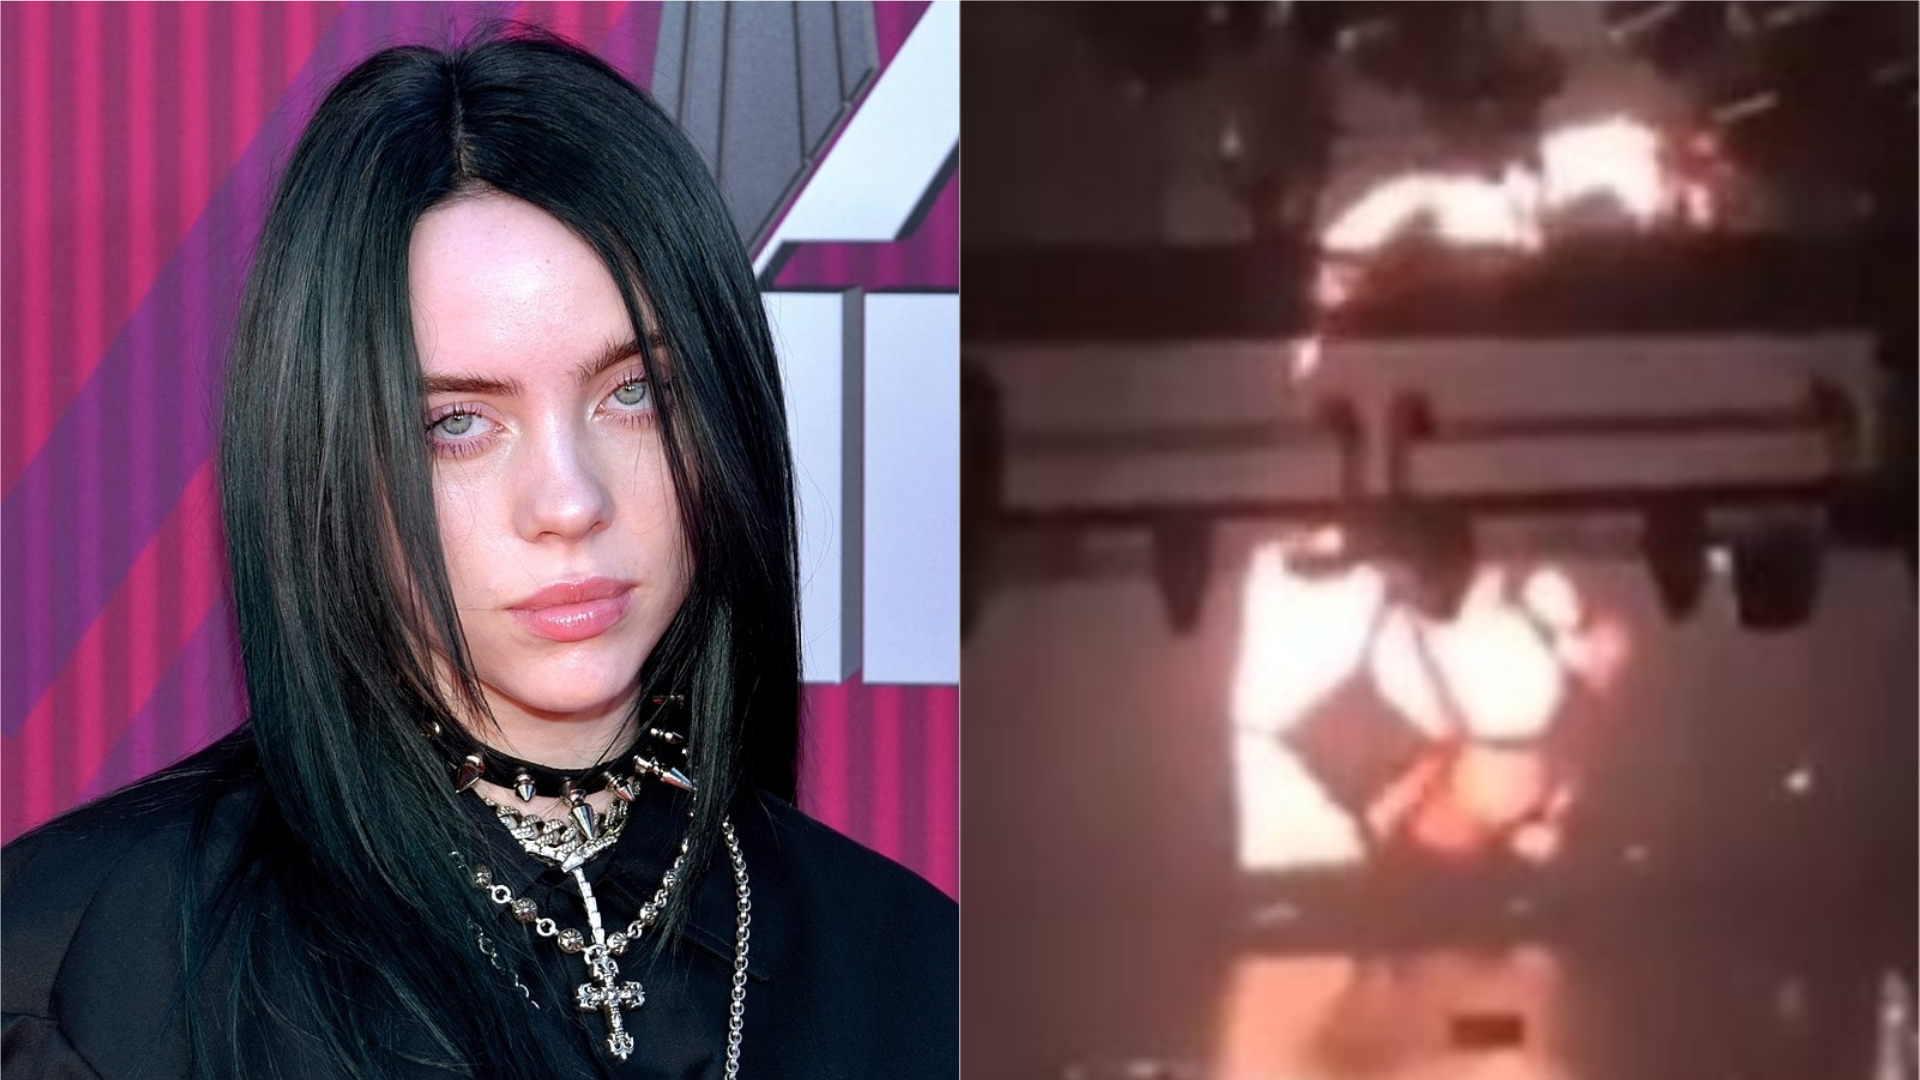 Billie Eilish Took Off Clothes in Video for Miami Concert